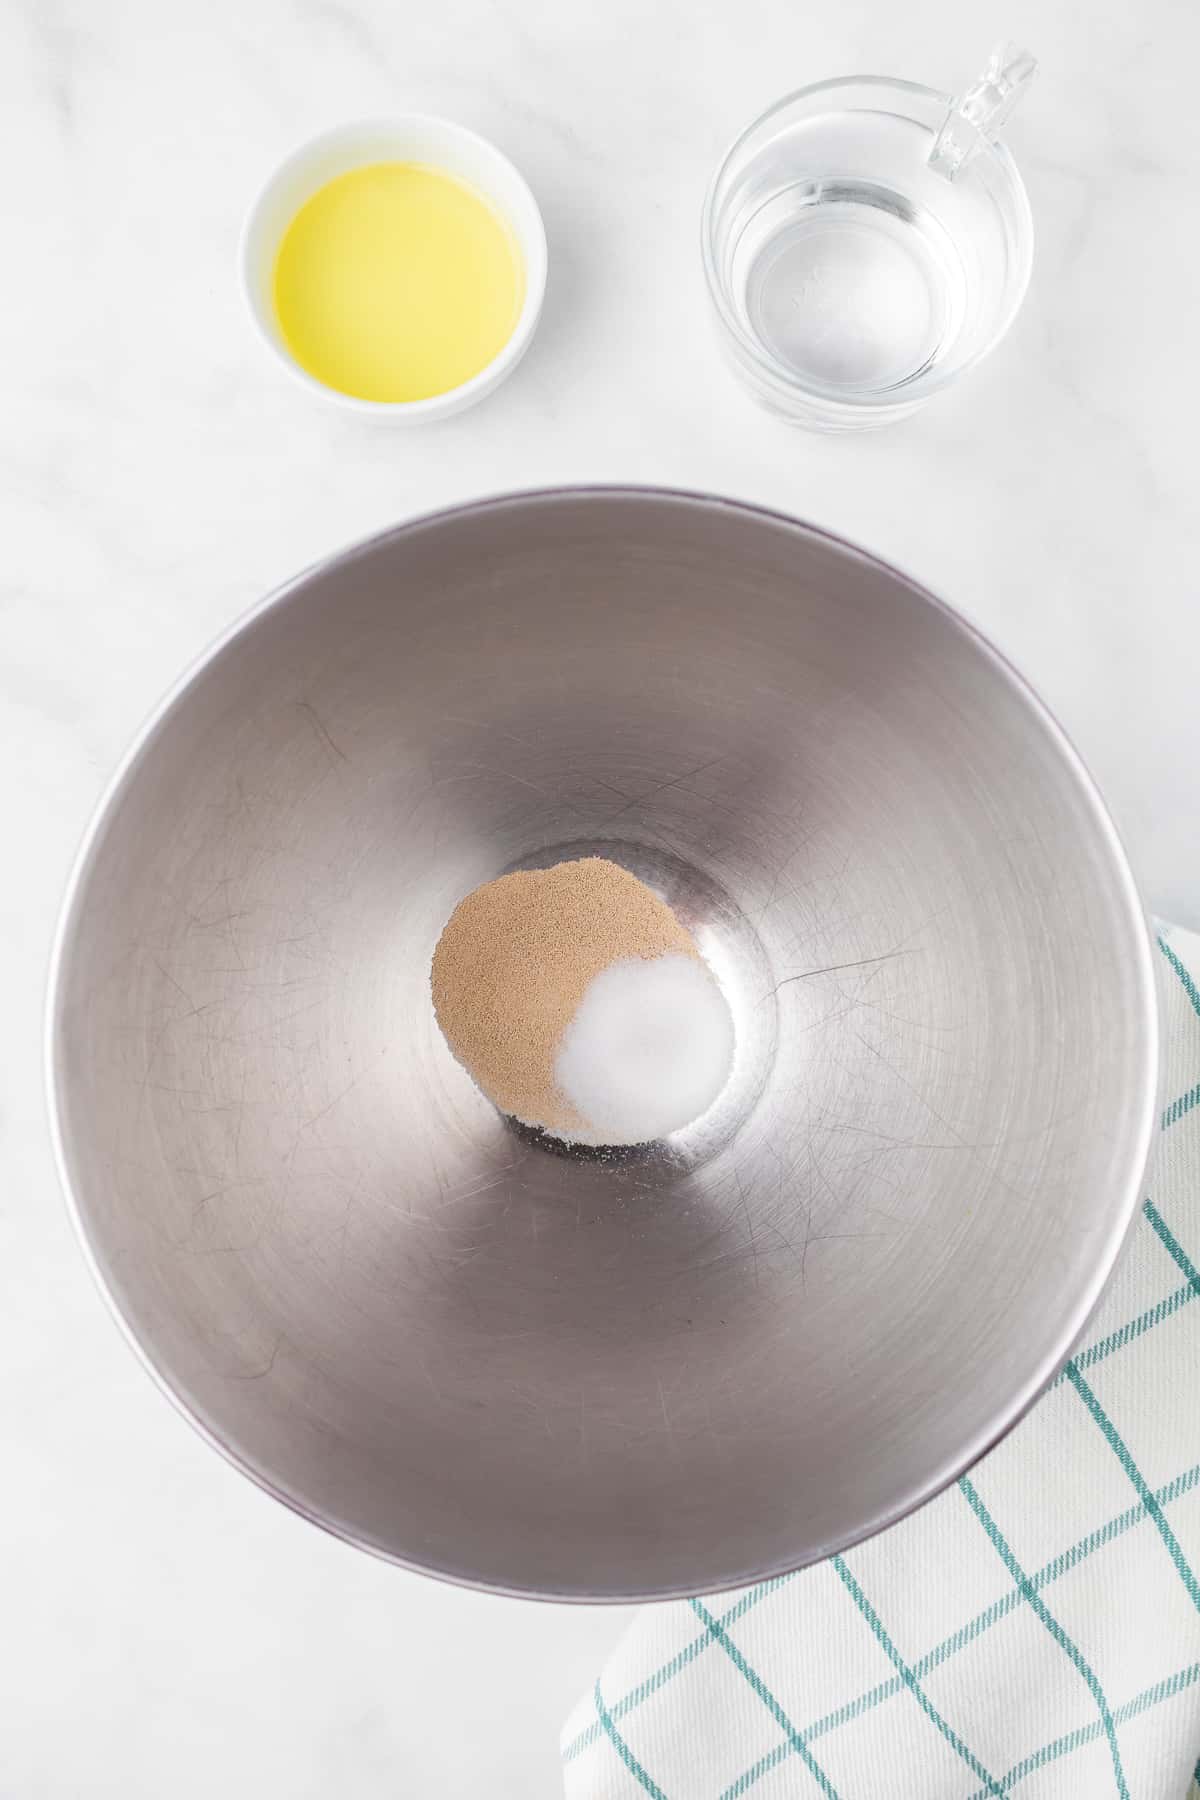 Yeast and sugar in a large mixing bowl from overhead with water and olive oil nearby in bowls on the counter.